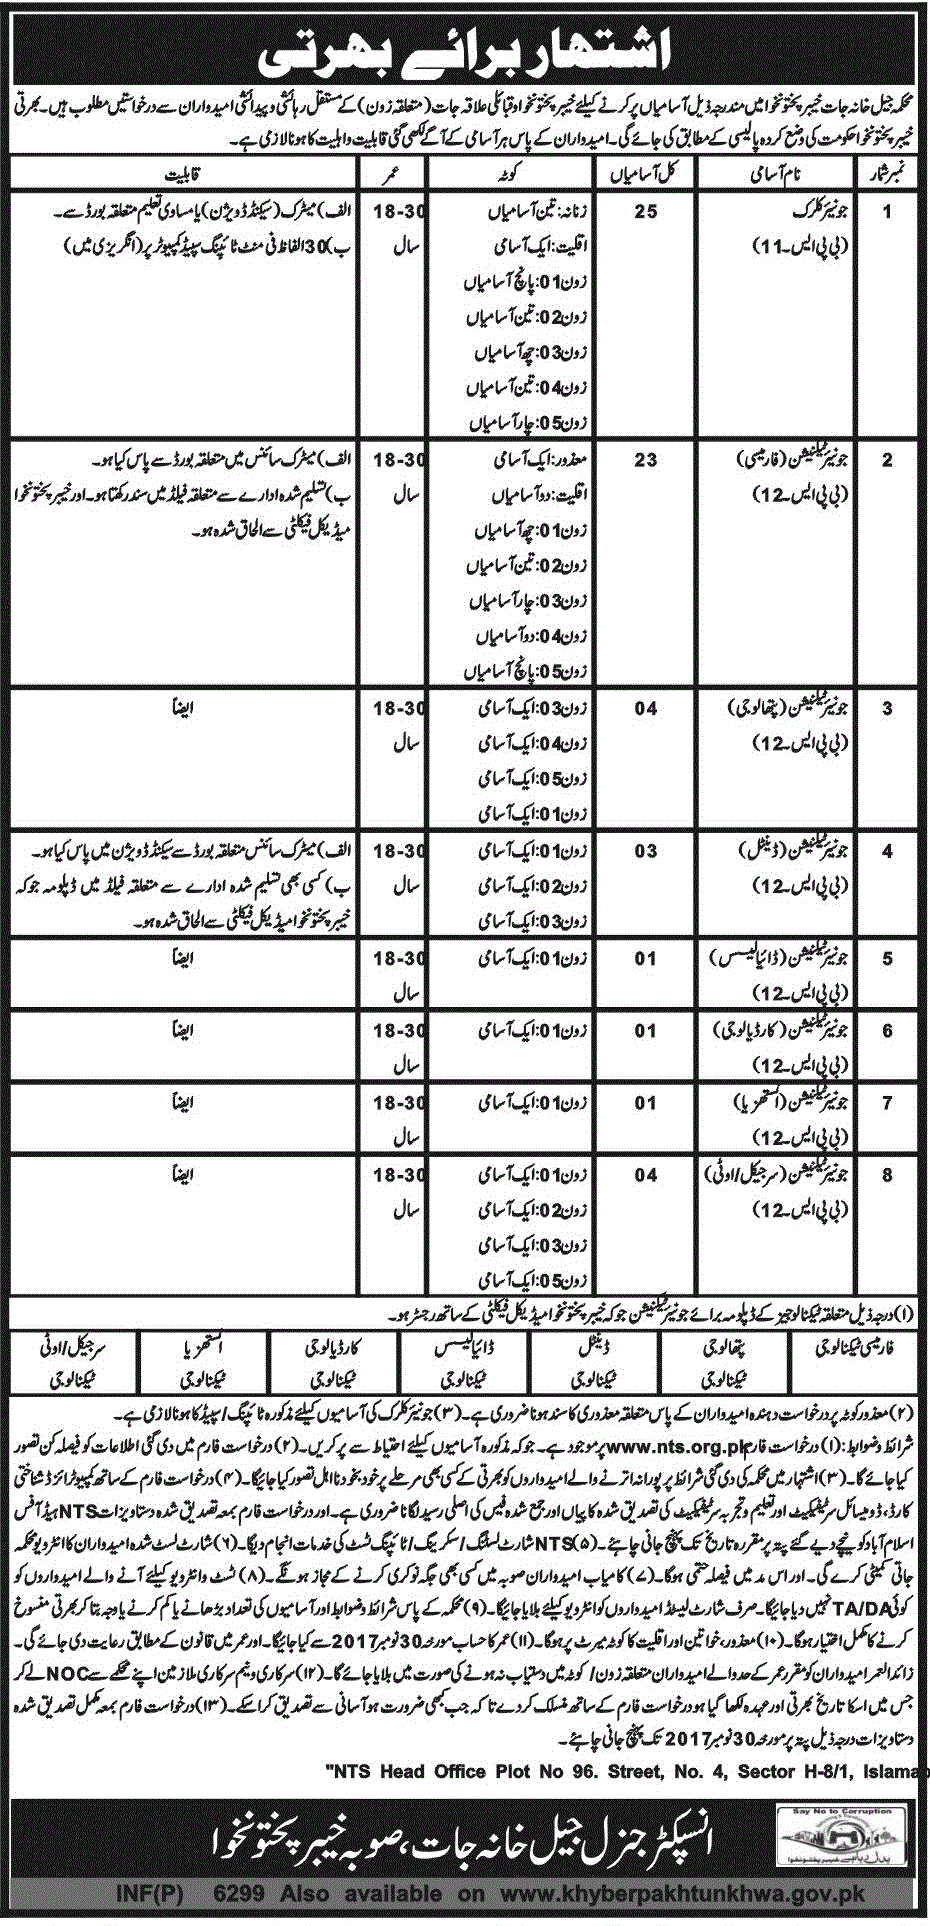 KPK Police Inspectorate General of Prisons NTS jobs 2022 Application Form